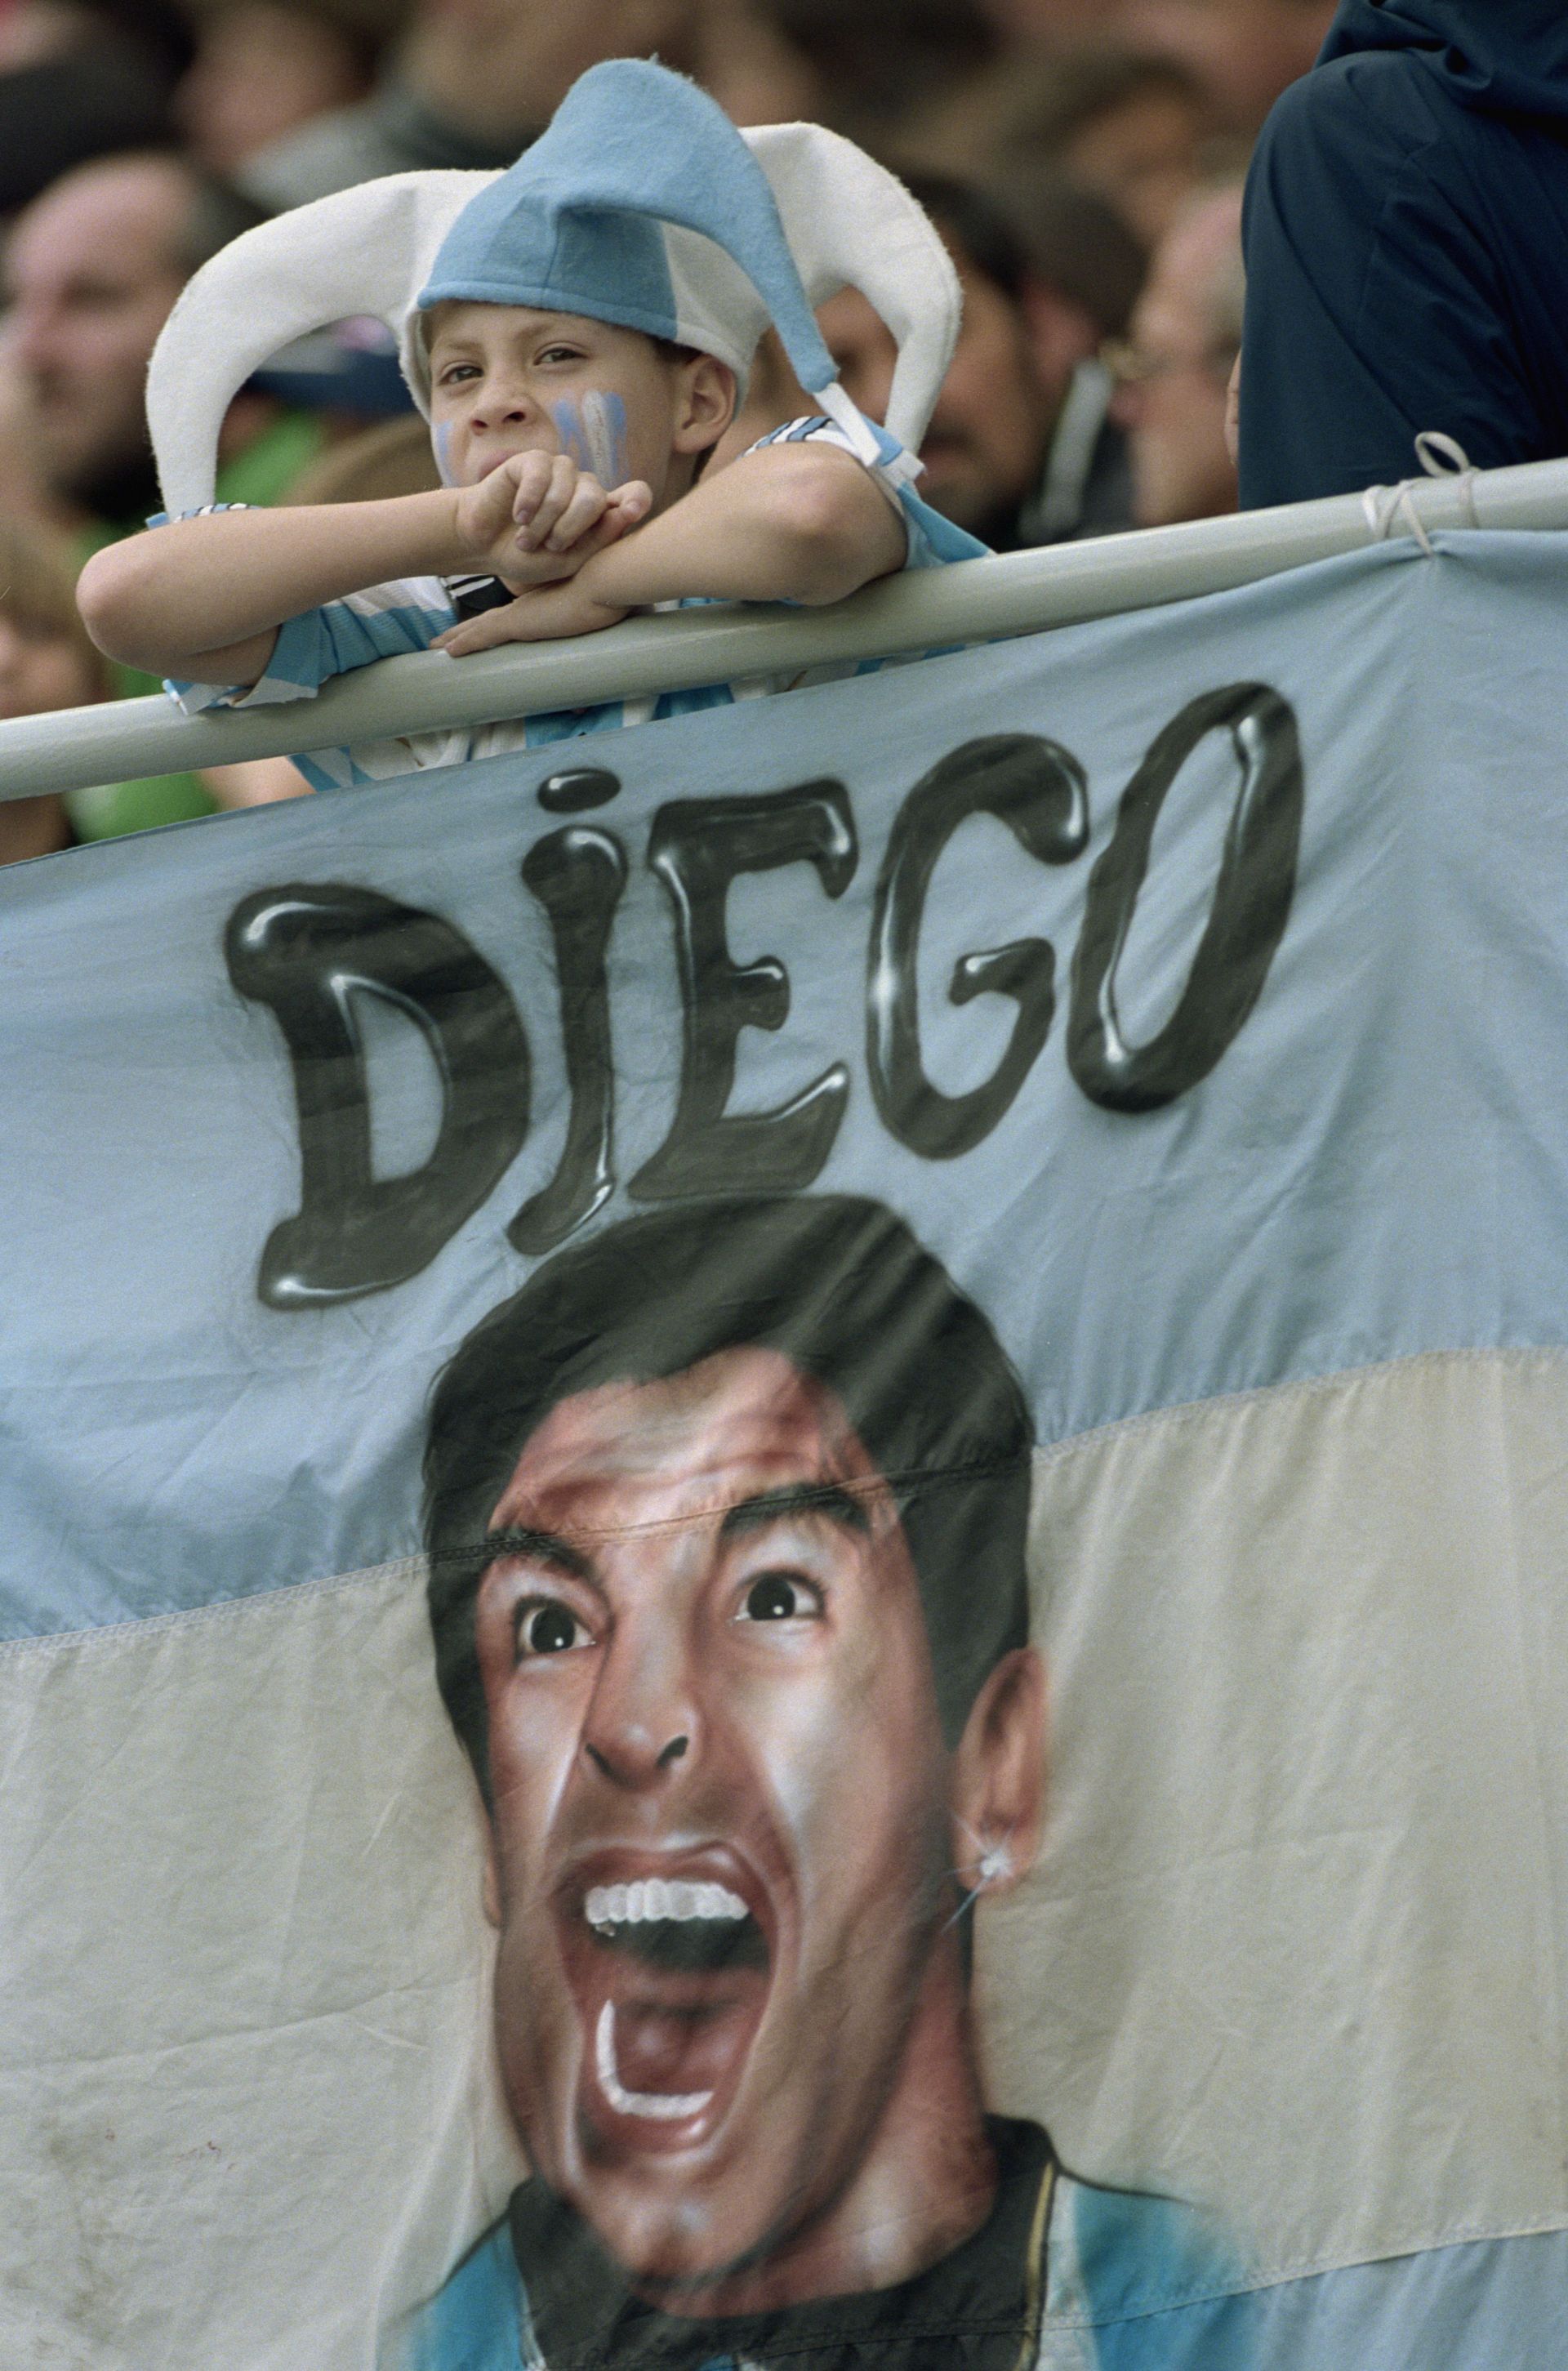 Argentina fans pay tribute to Maradona who is worshipped almost as a God.